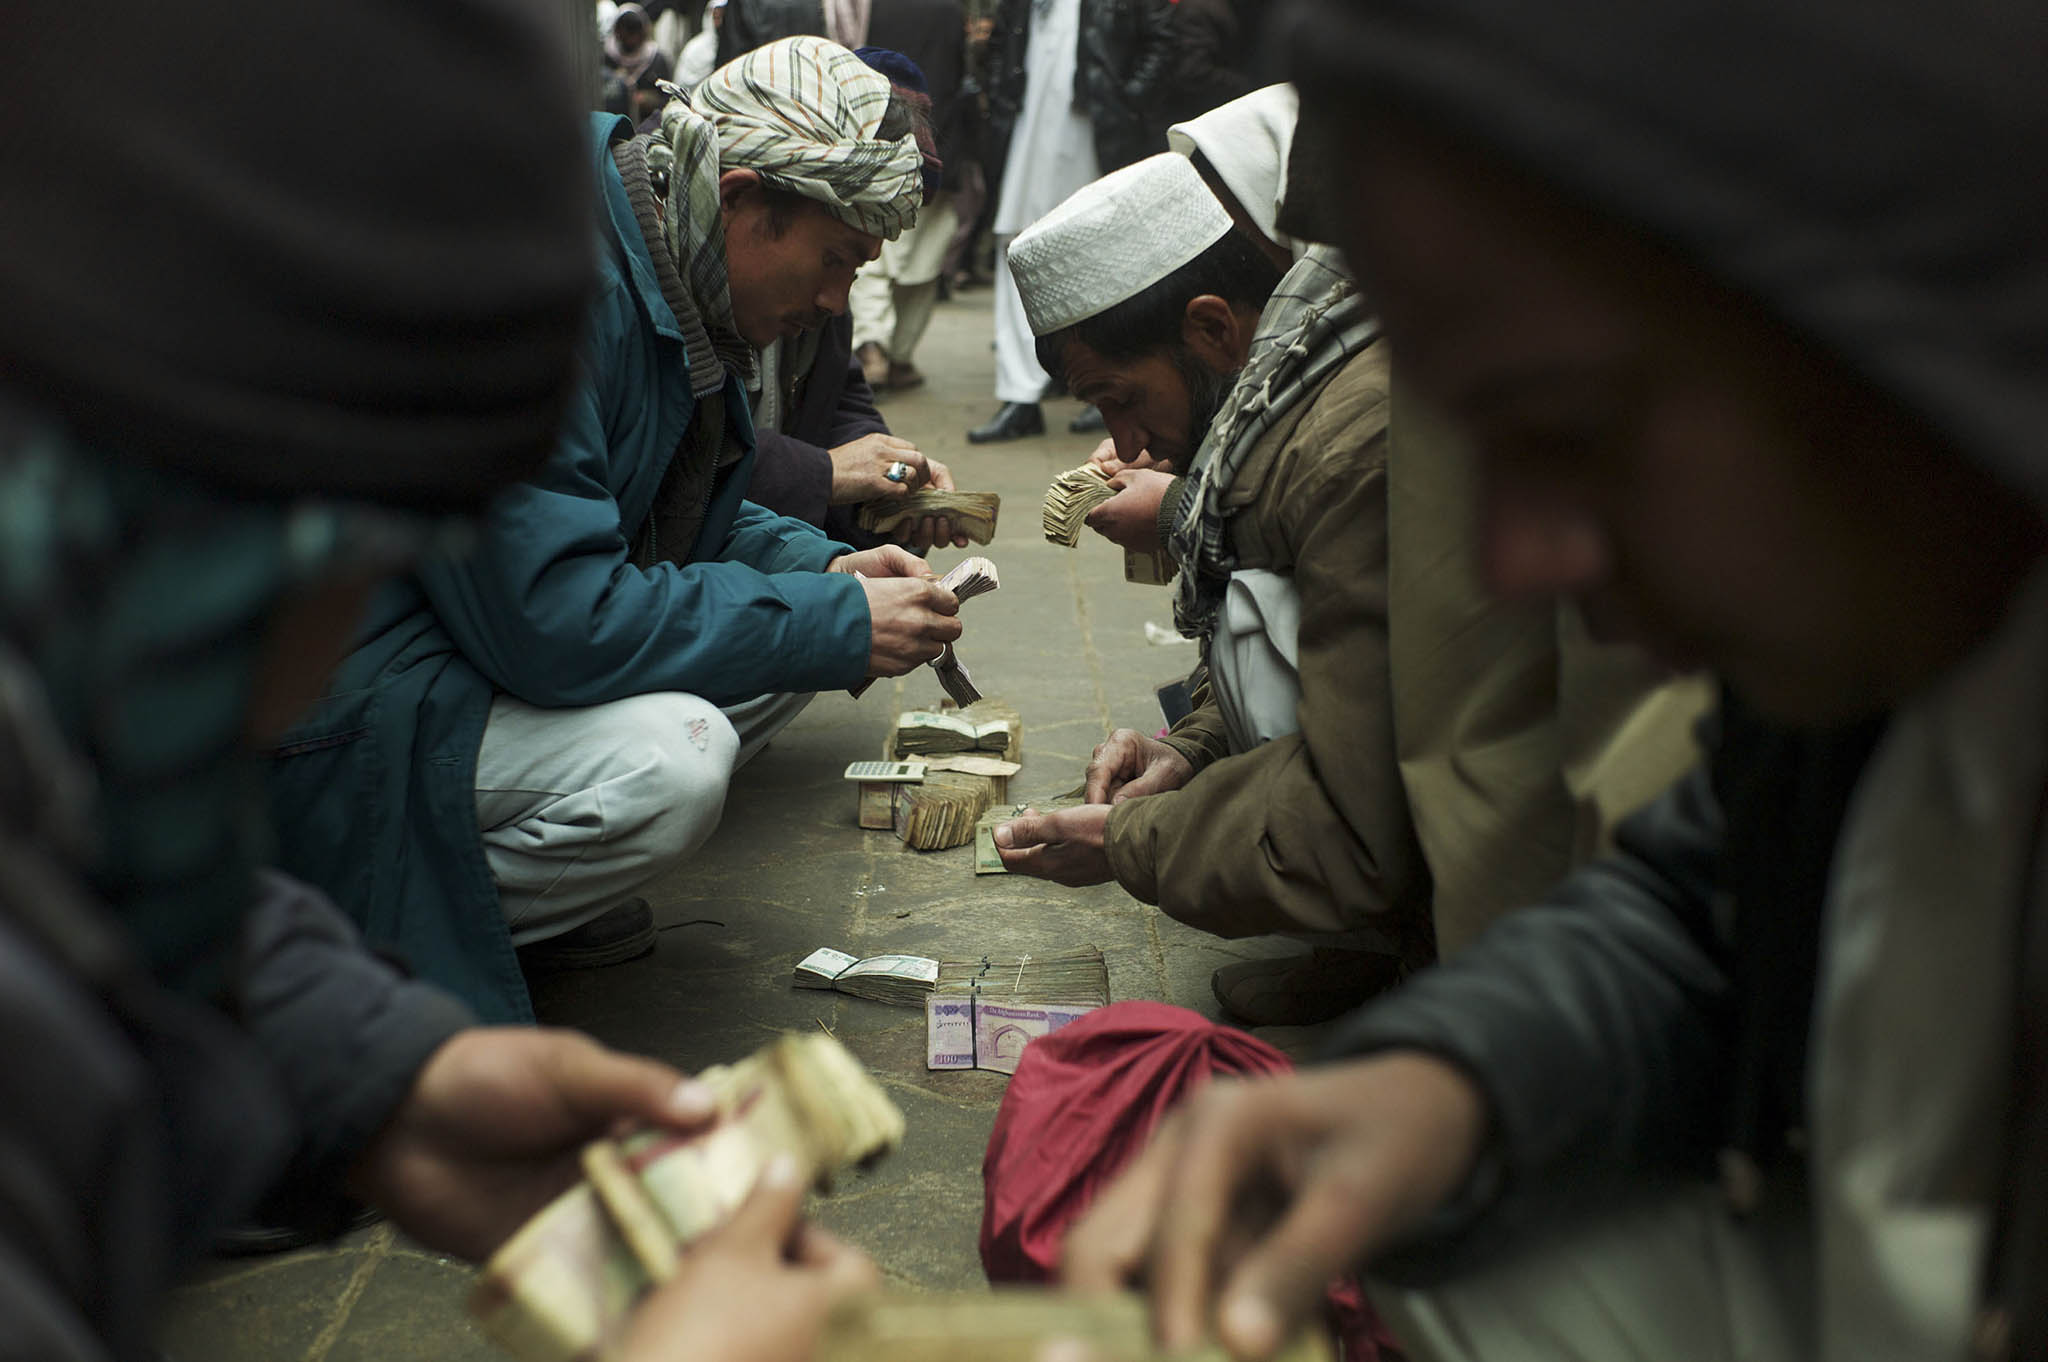 Men negotiate money exchanges at a market in Kabul, on Jan. 29, 2011. (Michael Kamber/The New York Times)